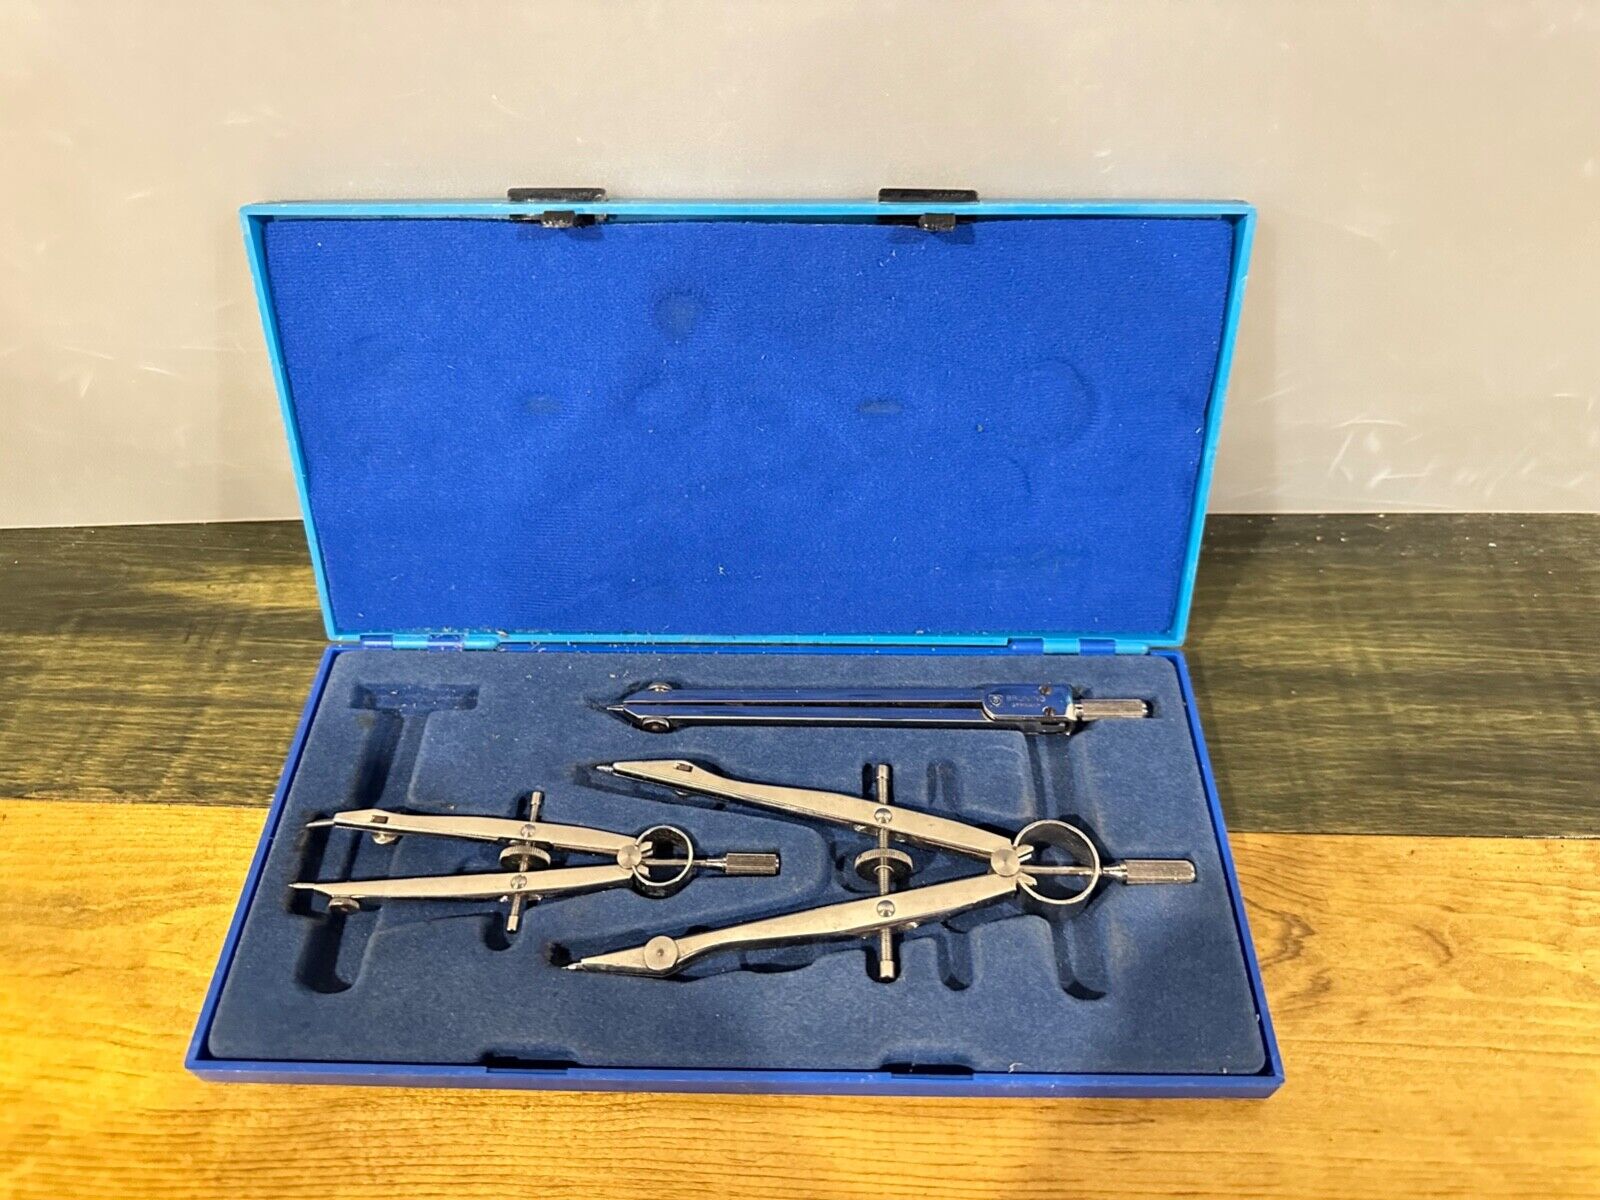 Vintage Bruning 64-178 Drafting Set In A Plastic Case - Made In Germany